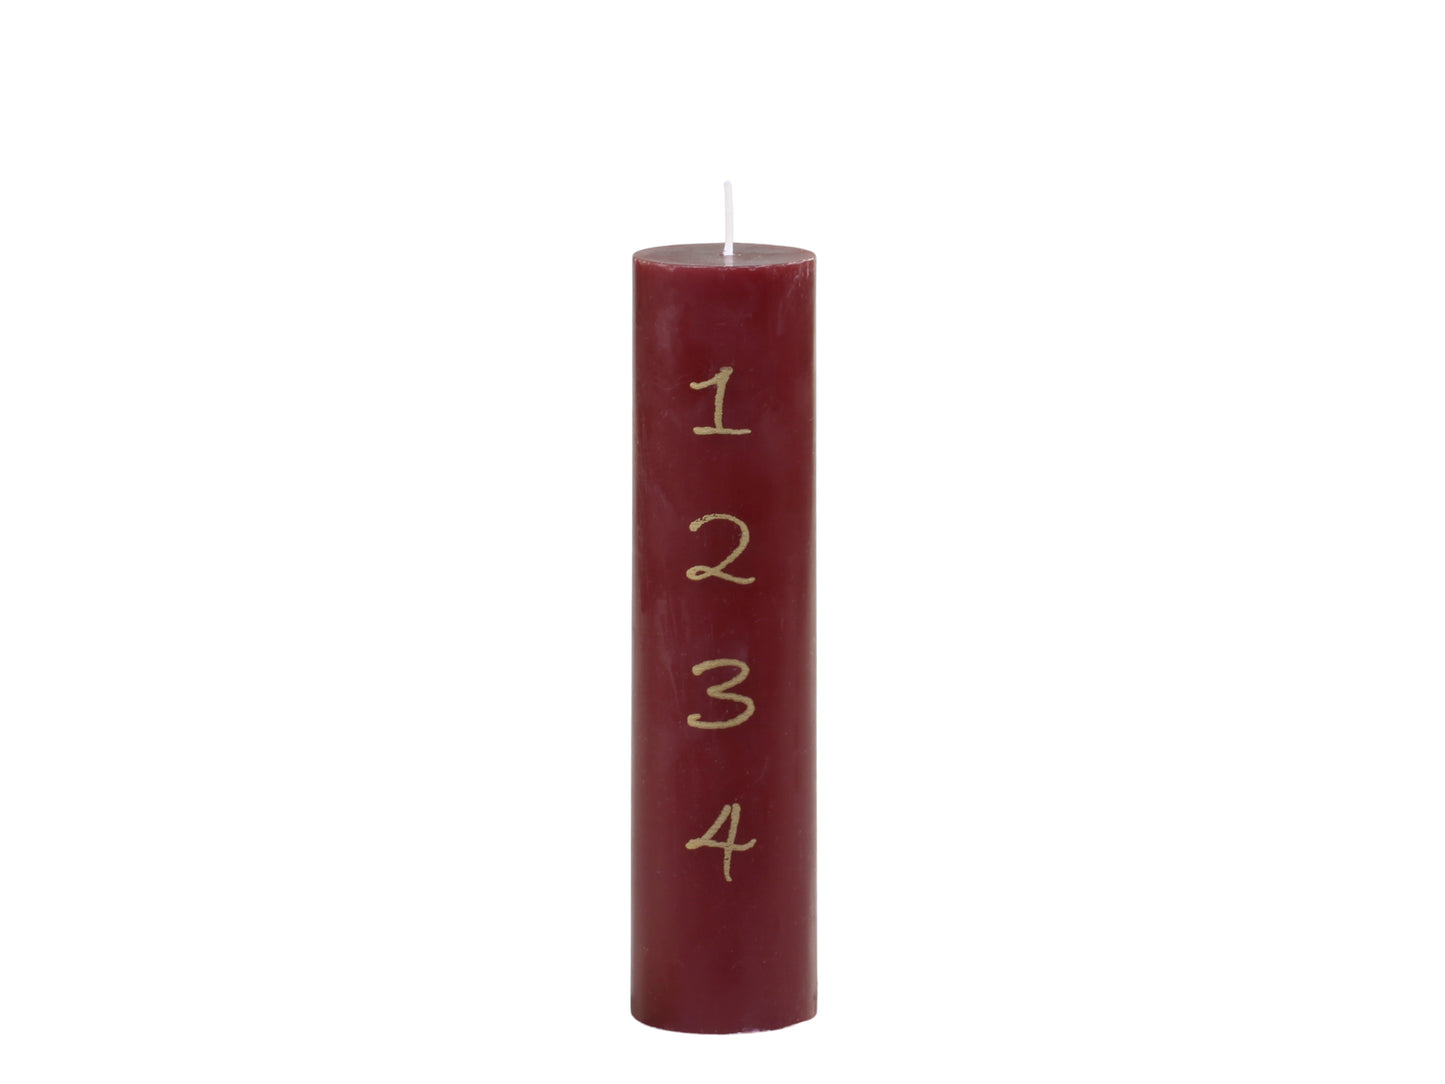 Advent Candle with Gold Numbers 1-4 Red